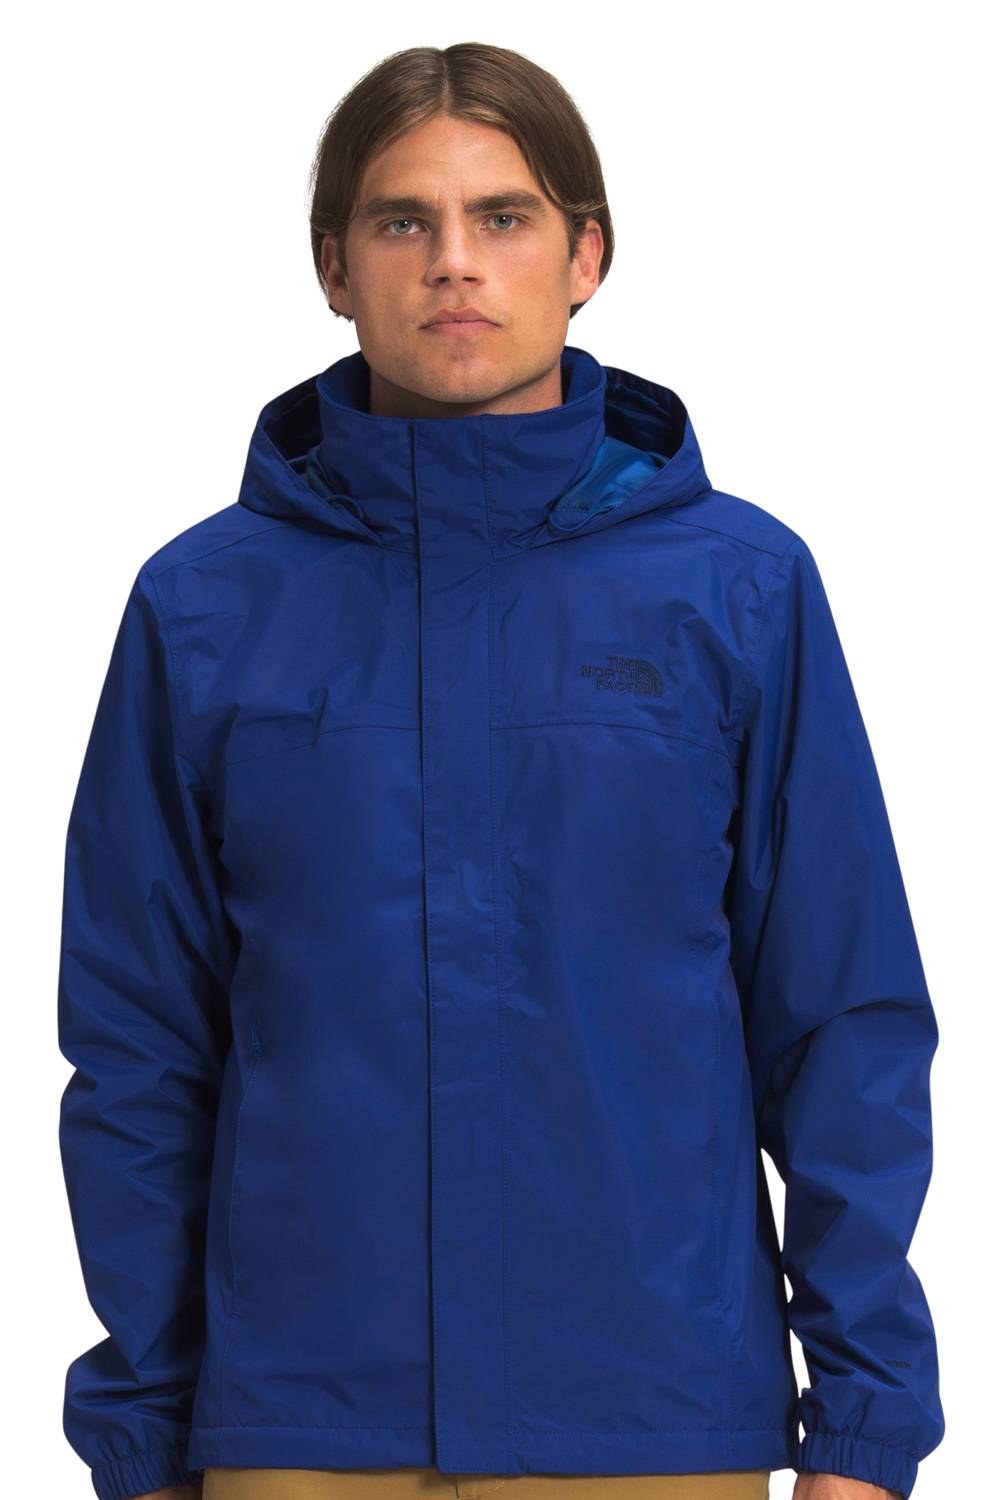 THE NORTH FACE - Chaqueta Impermeable Resolve 2 Hombre